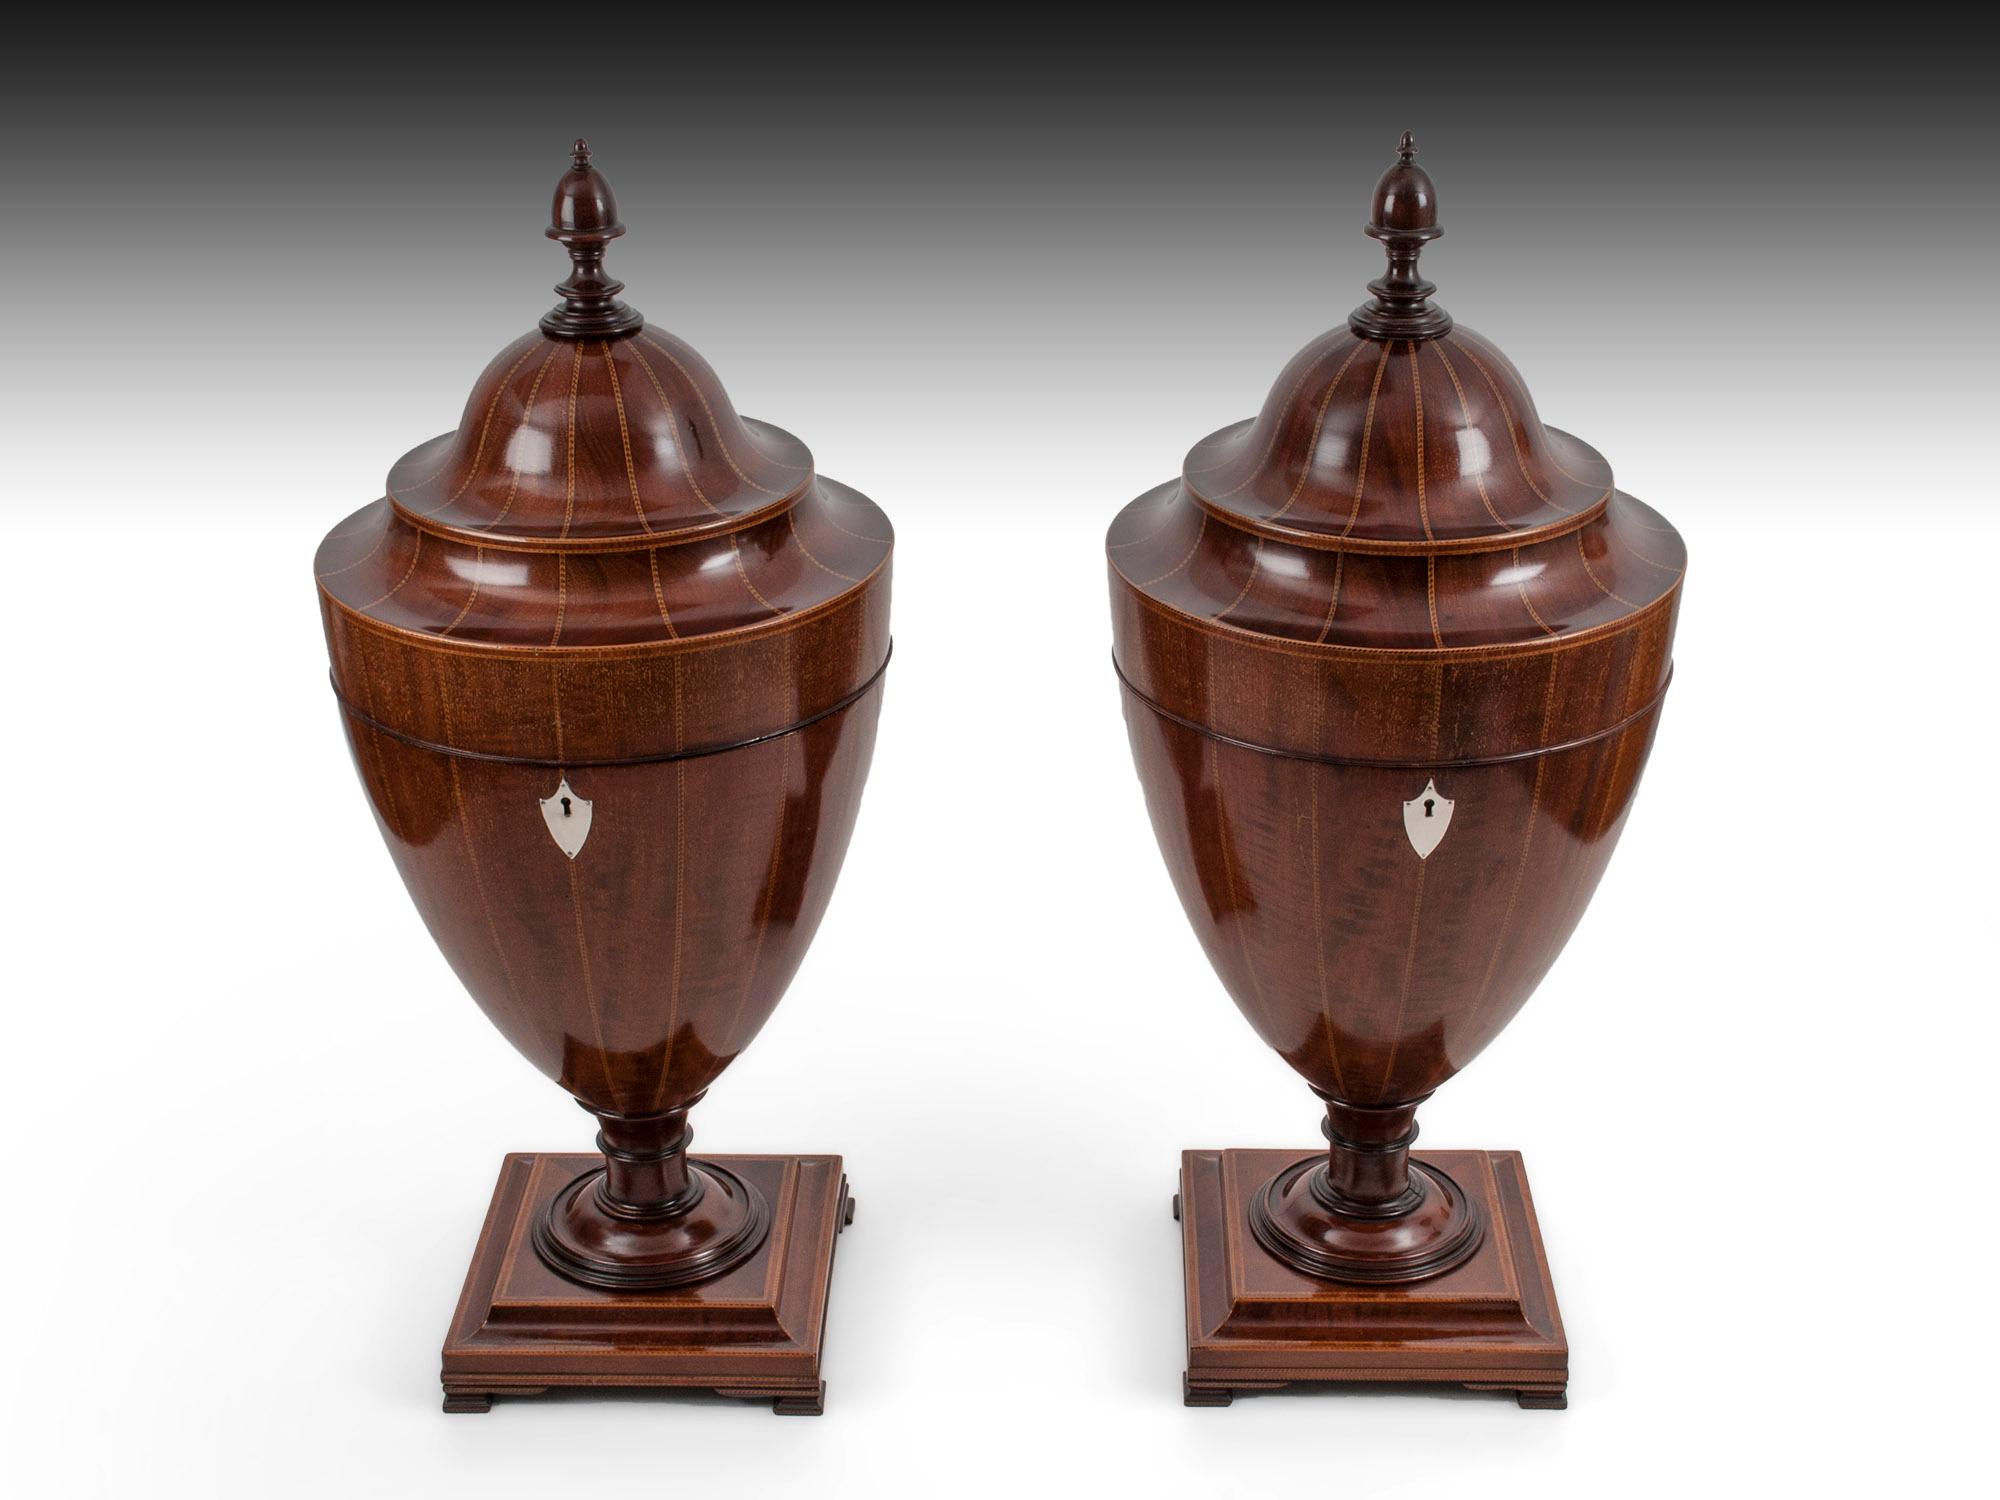 Pair of Mahogany Cutlery Urns inlaid with boxwood herringbone inlay and edged with a boxwood and tulipwood crossbanding. Their fronts are decorated with a silver shield-shaped escutcheon. Each stands on a square plinth base on ogee bracket feet.